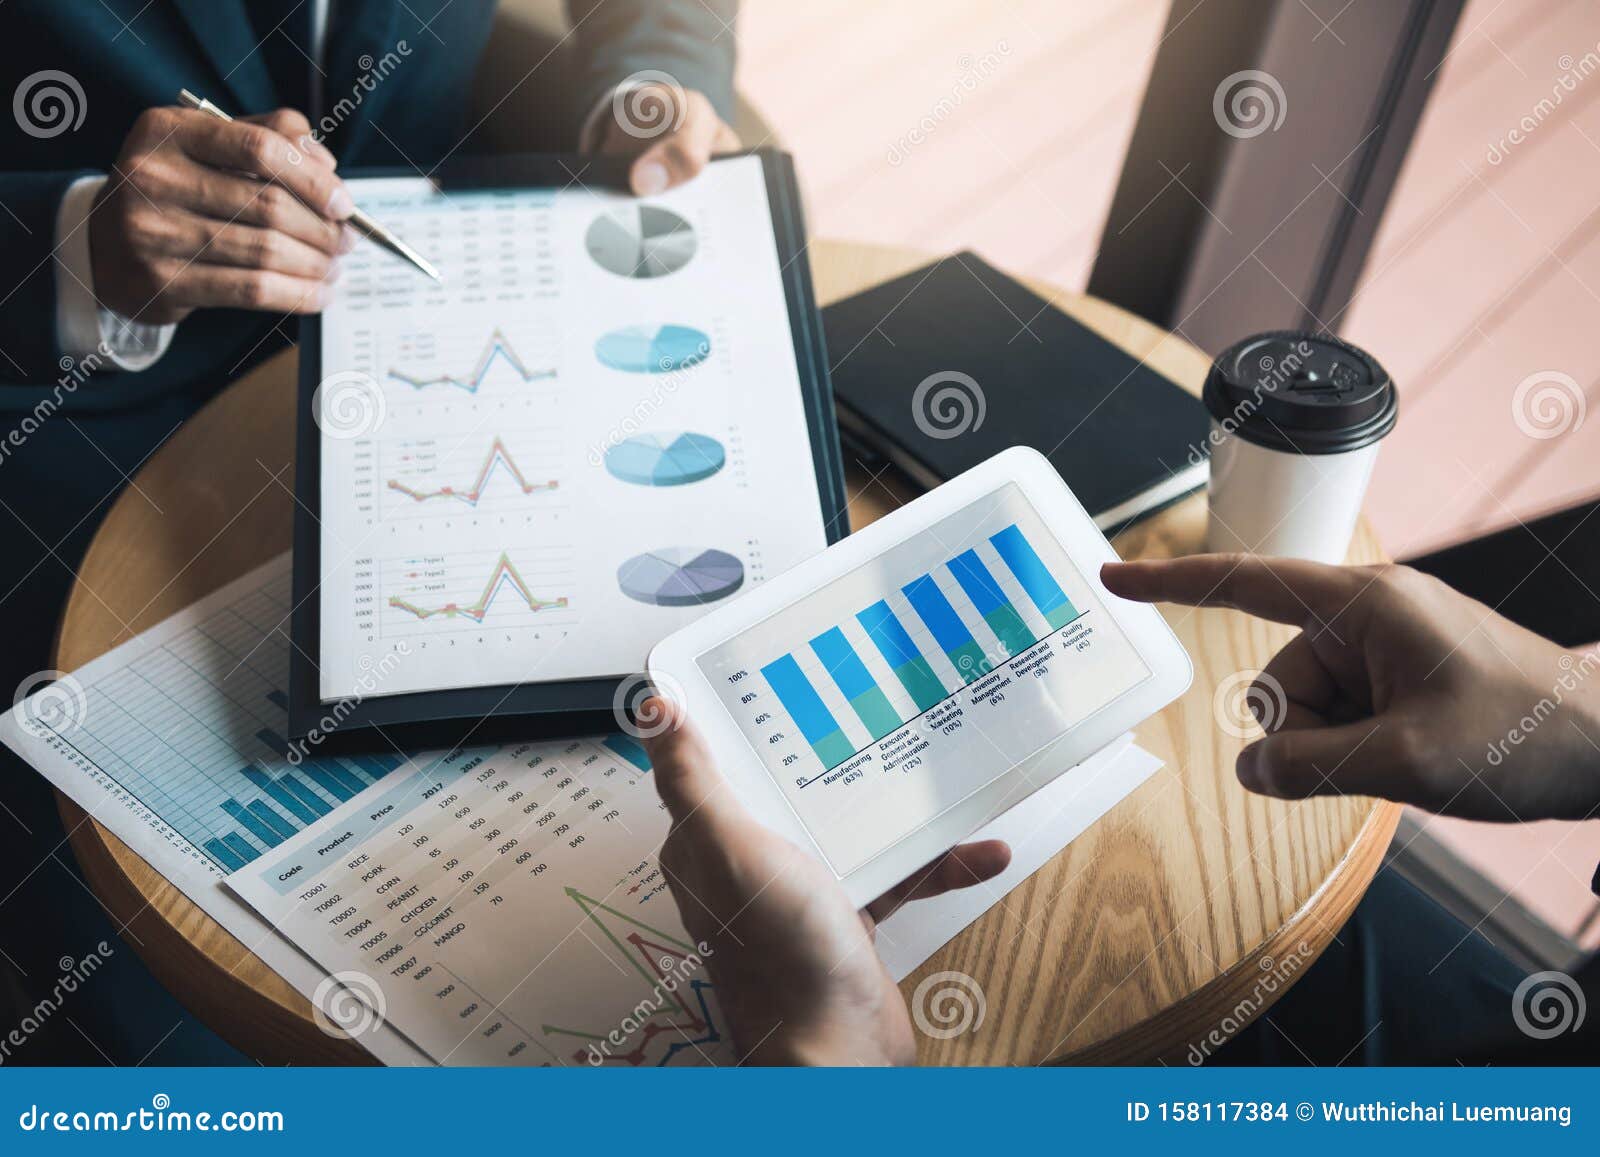 managers are using tablets to analyze sales cost reports and explain summary reports to employees calculate and record summary